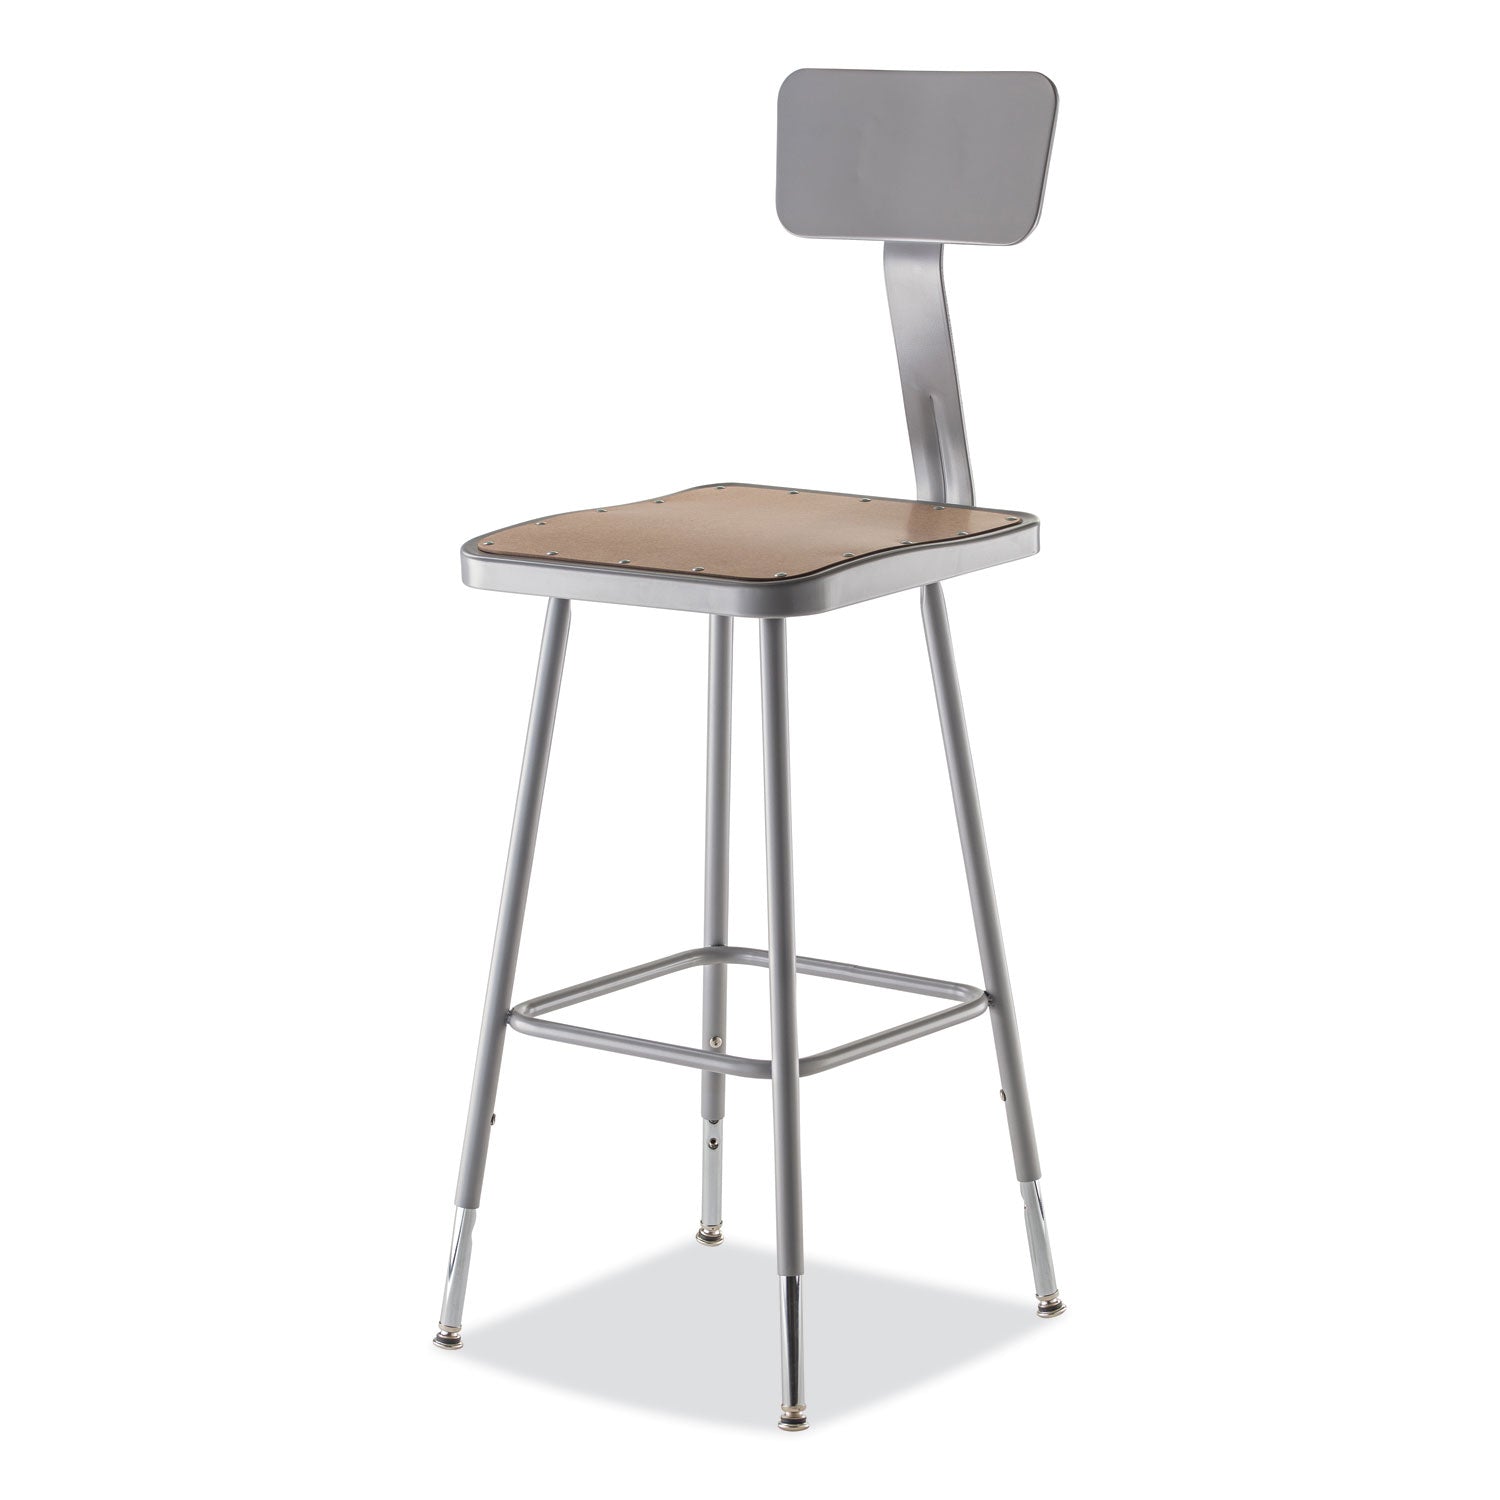 6300-series-height-adj-hd-square-seat-stool-w-back-supports-500-lb-2375-3175-seat-ht-brown-gray-ships-in-1-3-bus-days_nps6324hb - 2